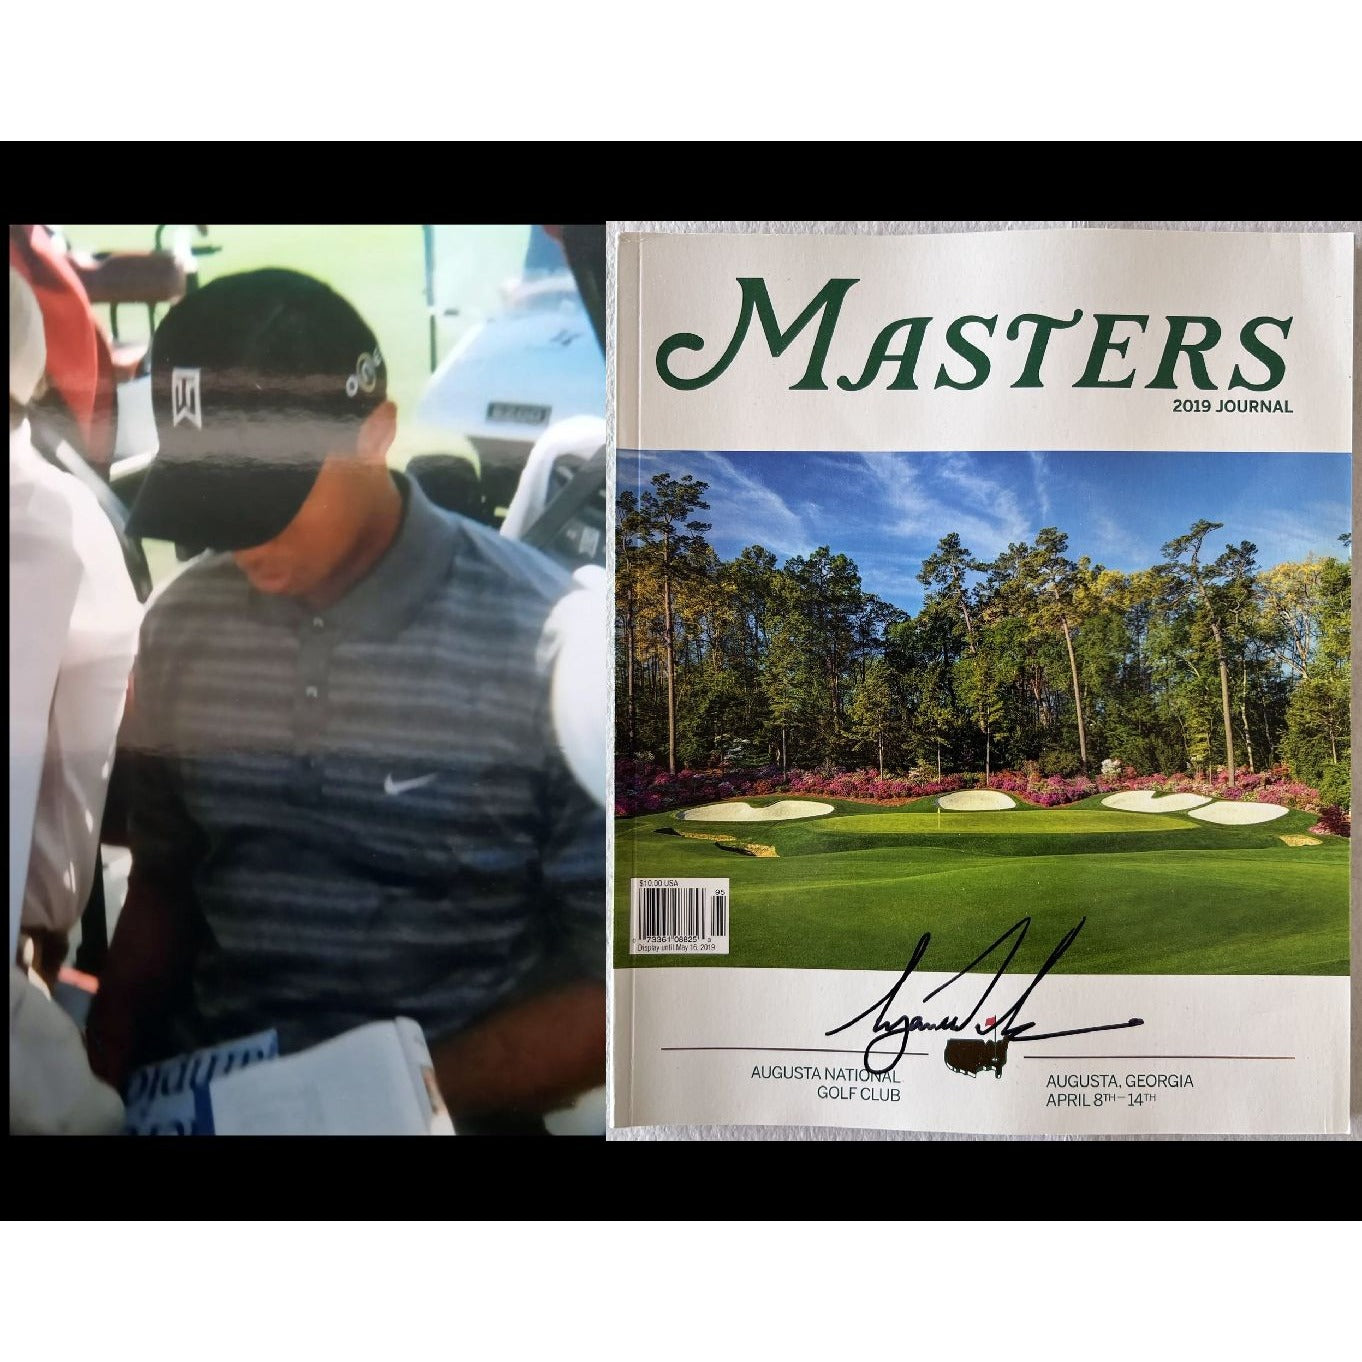 Tiger Woods 2019 Masters Journal signed with proof